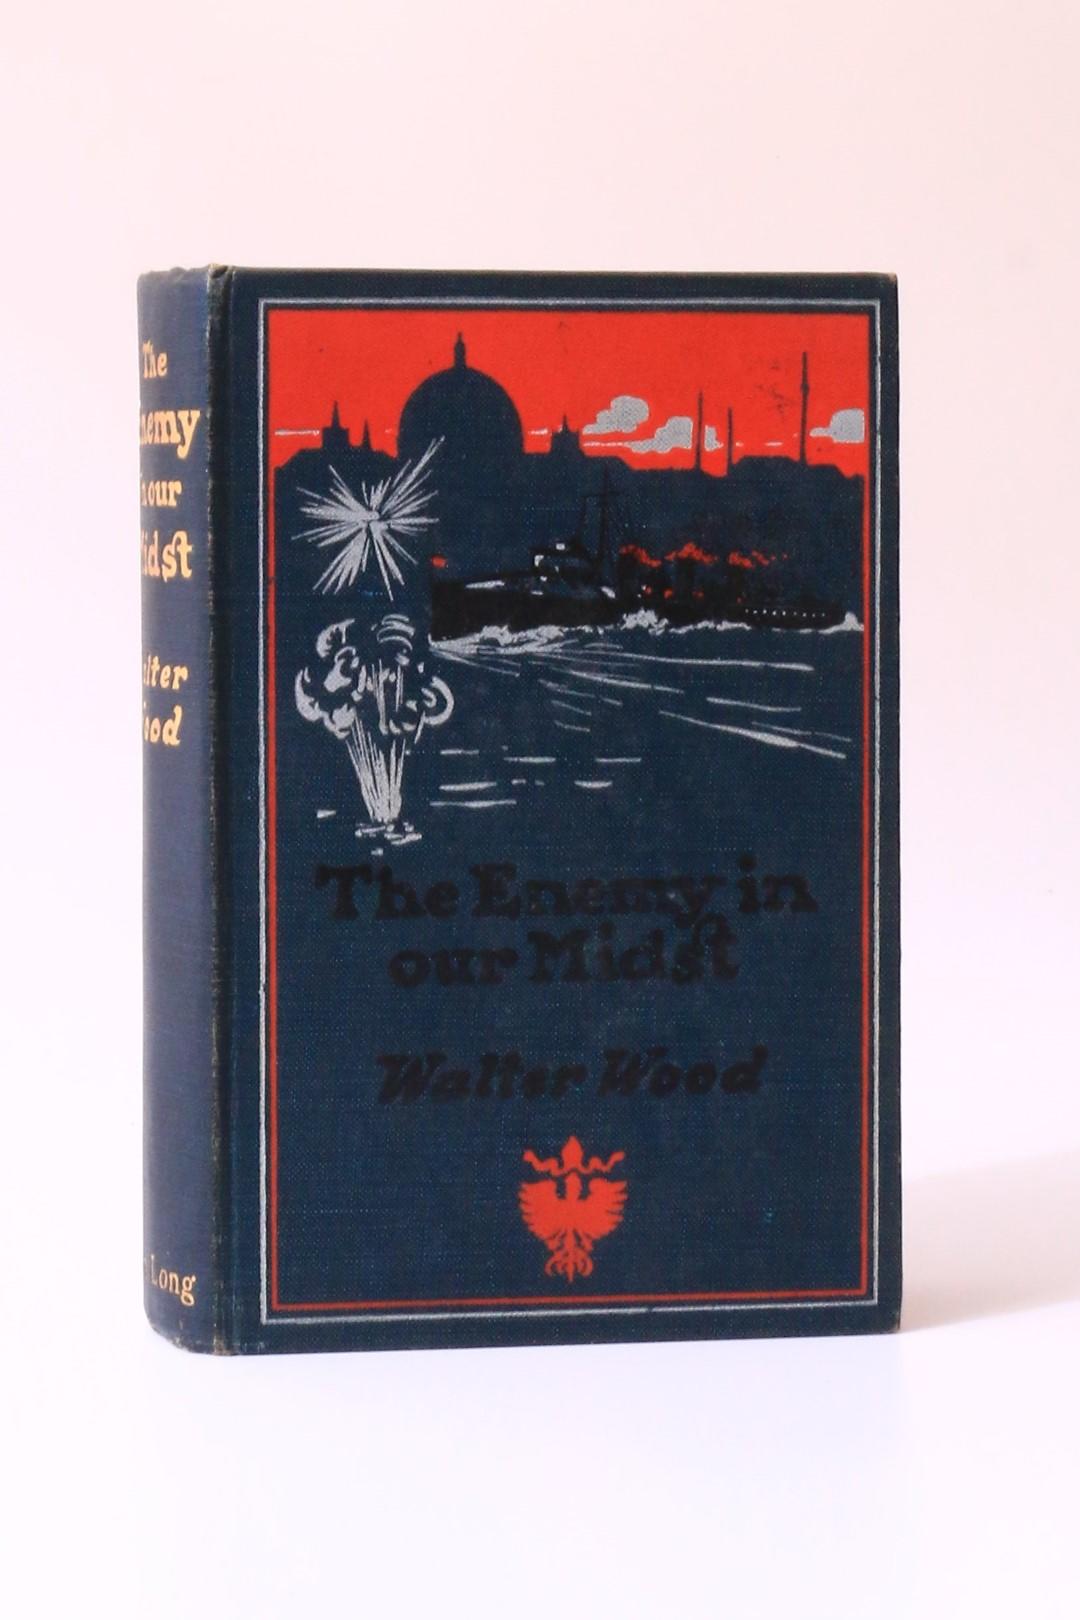 Walter Wood - The Enemy in our Midst: A Story of a Raid on England - John Long, 1906, First Edition.